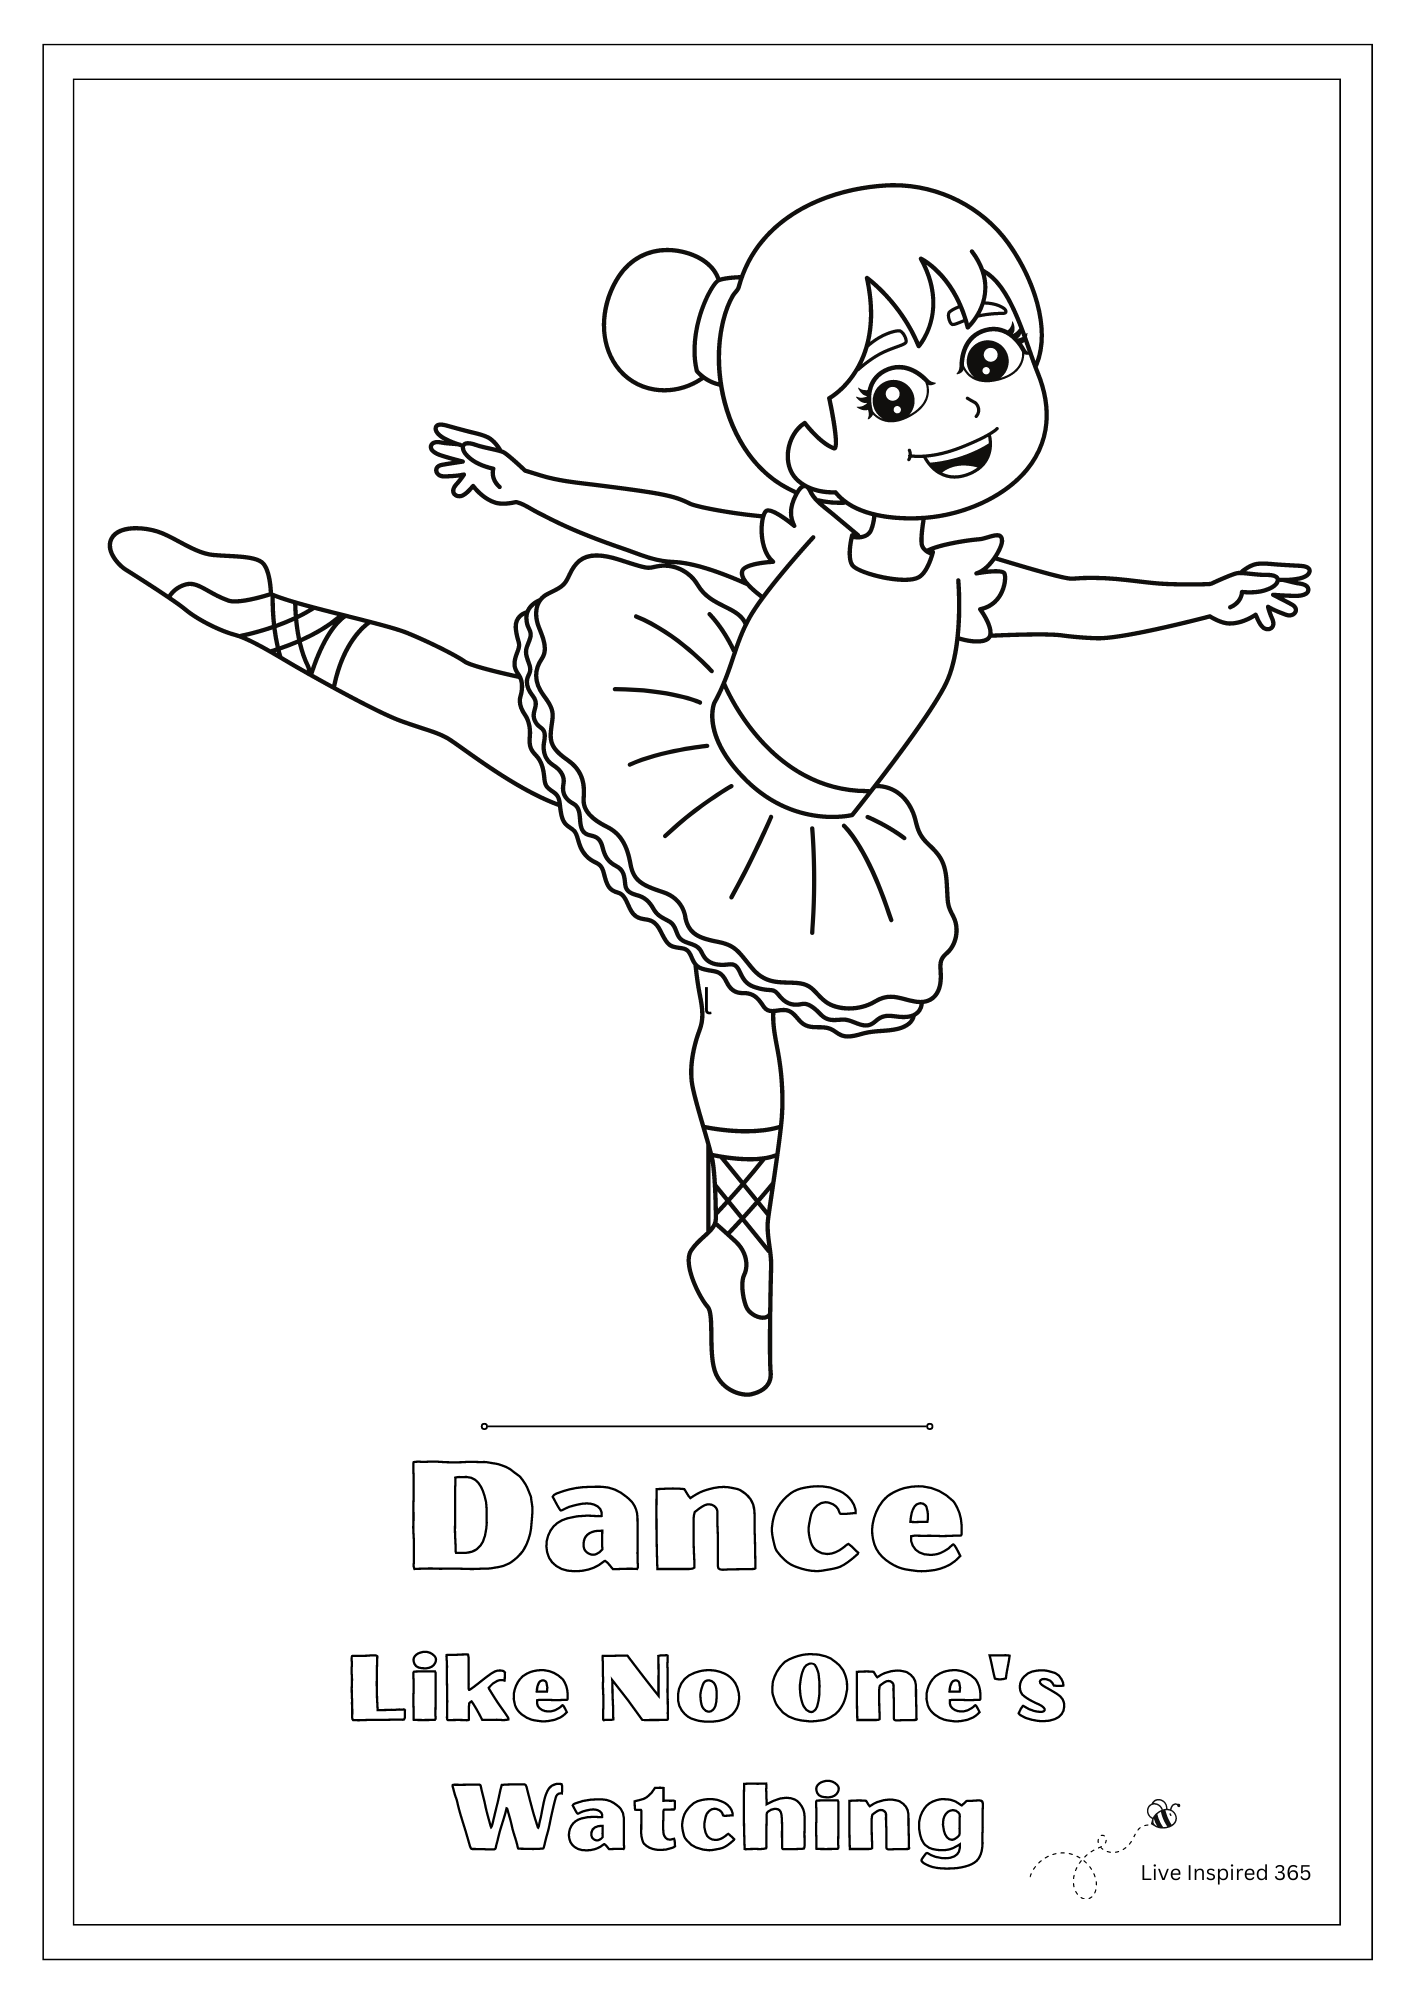 Dance-Coloring Page